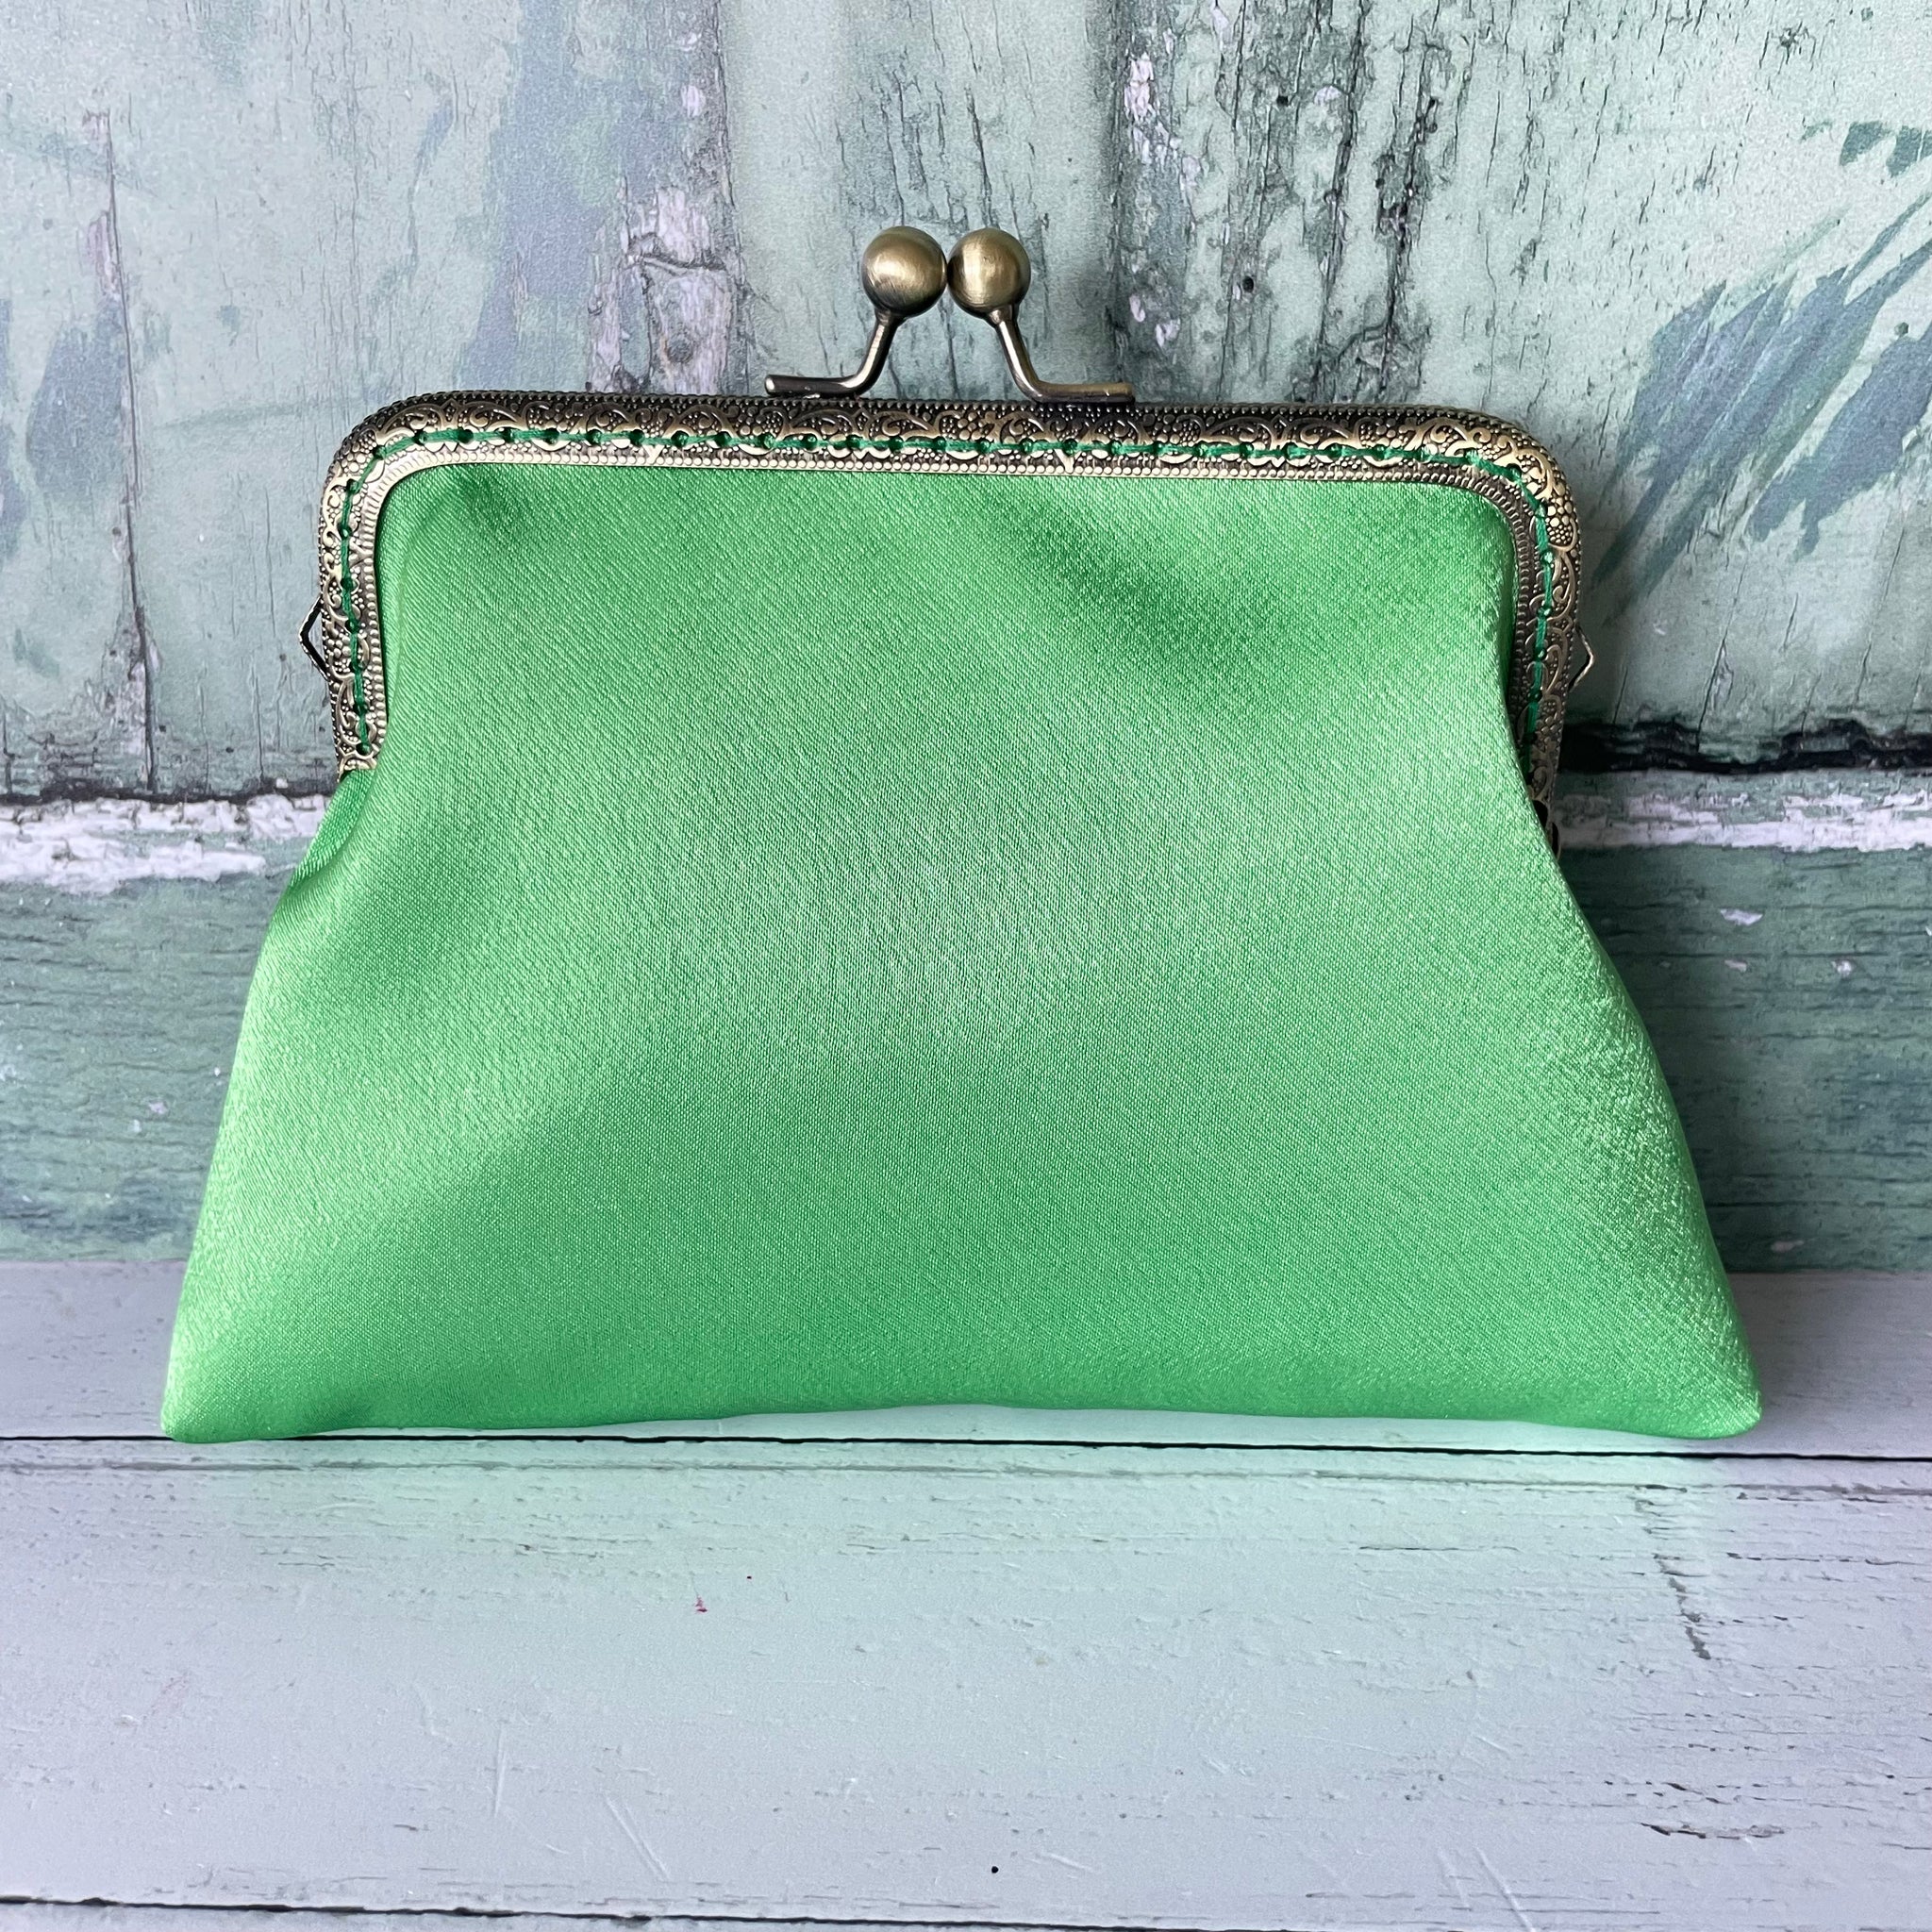 Bright Parrot Green Satin 5.5 Inch Clasp Purse Frame Clutch Bag